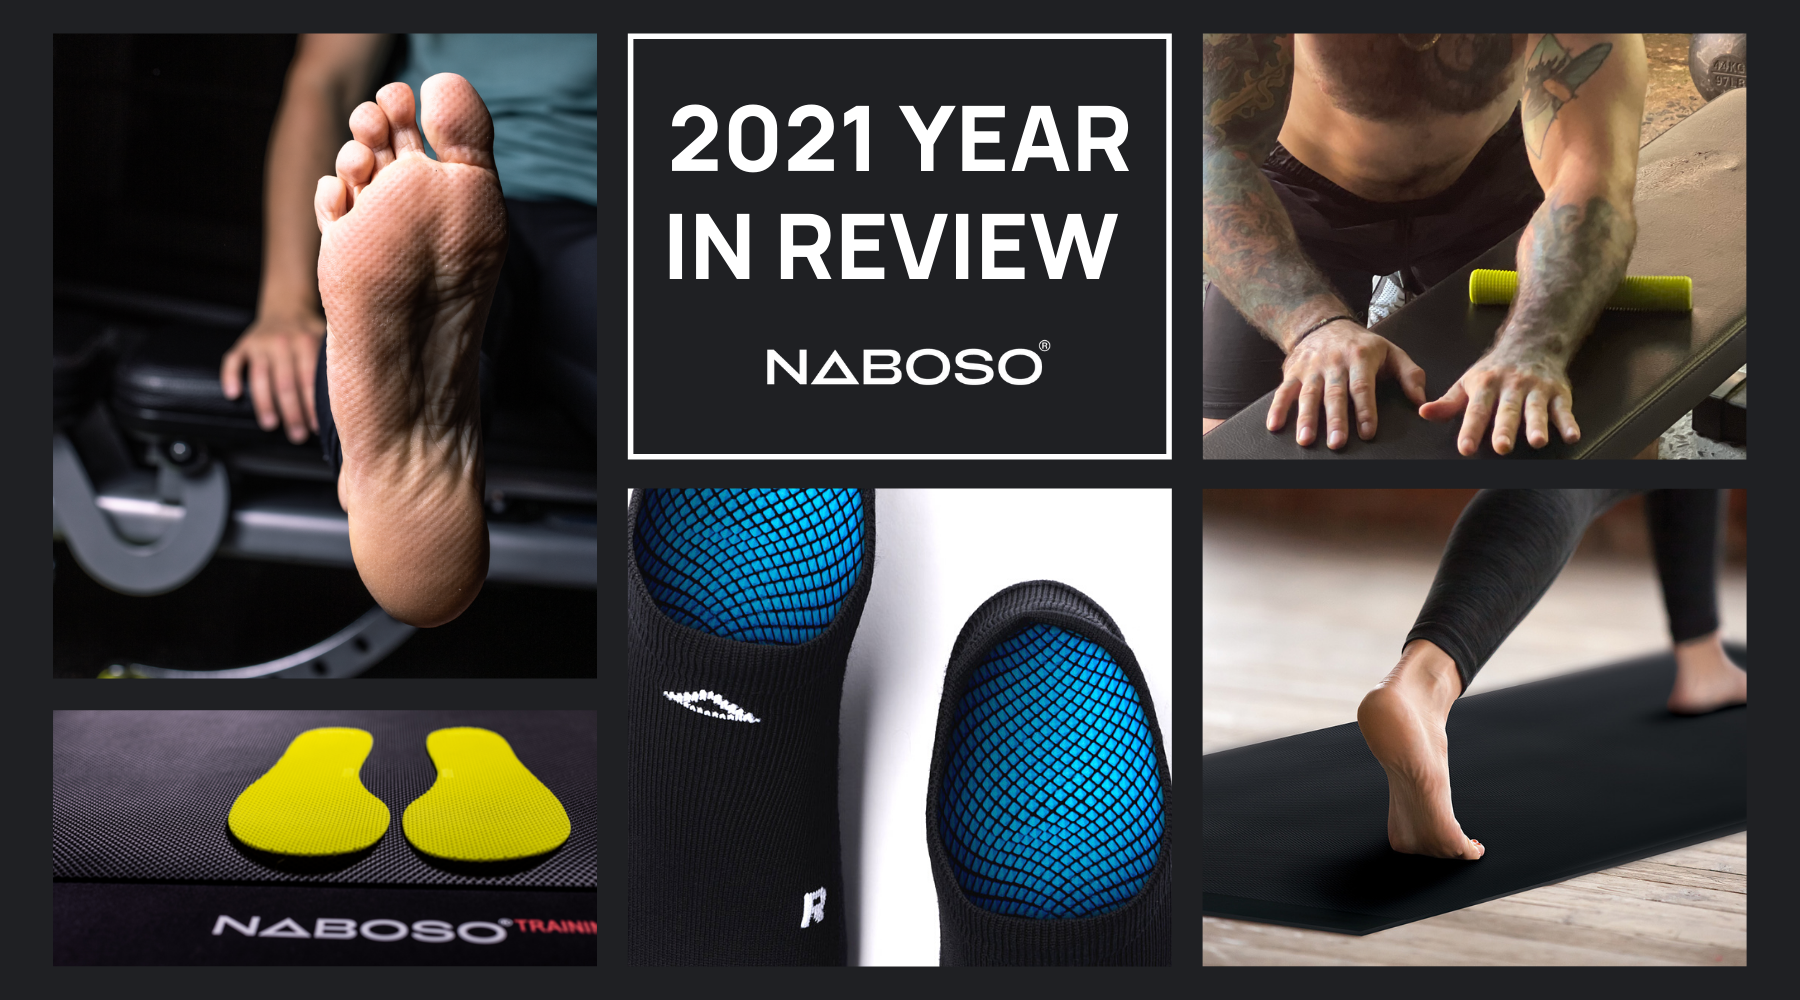 Naboso 2021 Year in Review